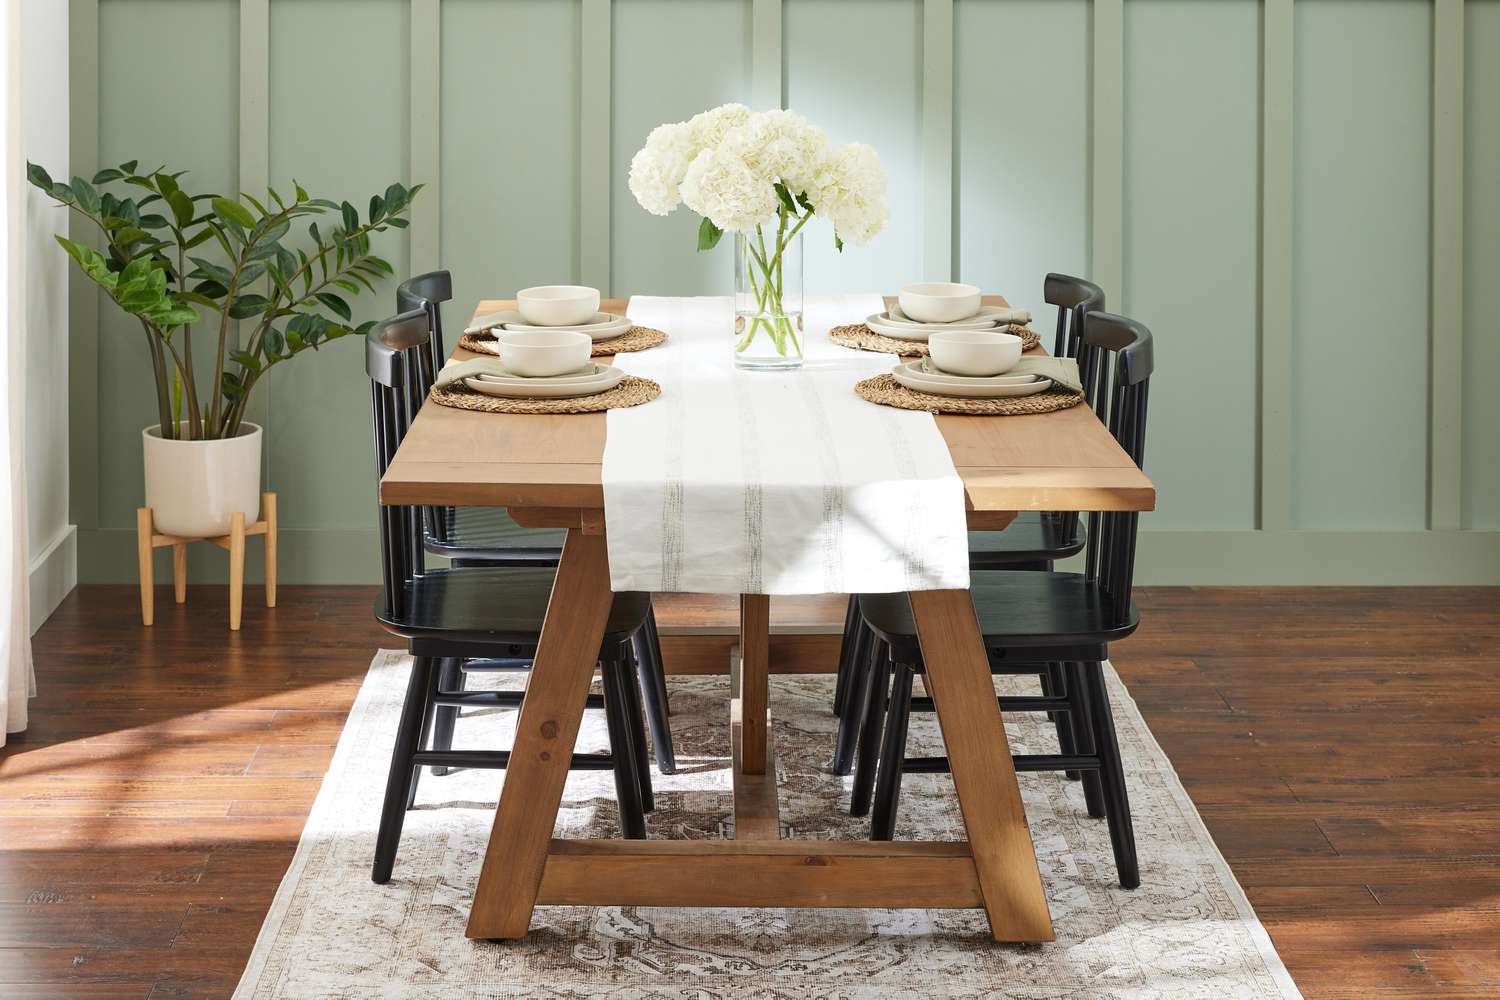 How To Style A Square Dining Table